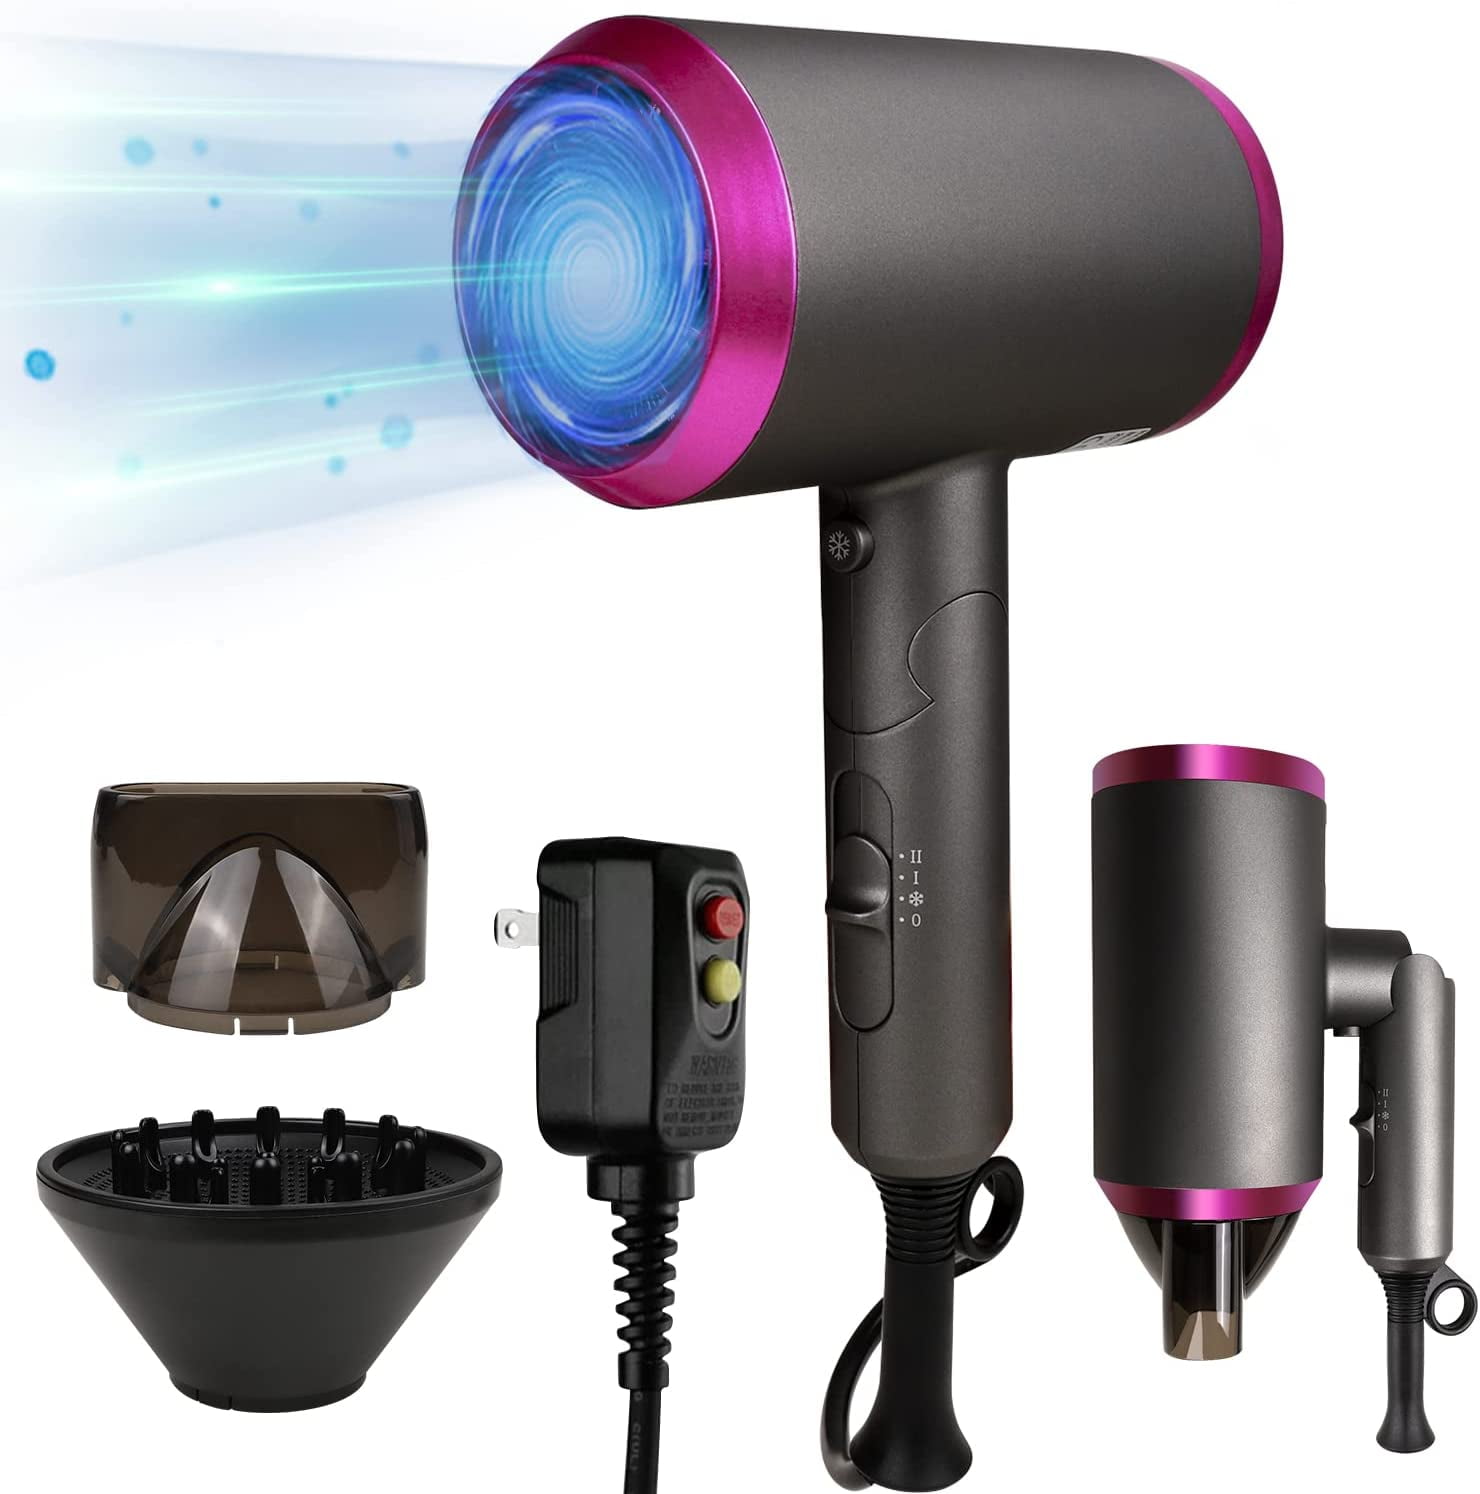 SHAGGY NOVA MINI HAIR DRYER  PROFESSIONAL HAIR STYLING ROUND COMB Electric  Hair Styler Price in India  Buy SHAGGY NOVA MINI HAIR DRYER  PROFESSIONAL  HAIR STYLING ROUND COMB Electric Hair